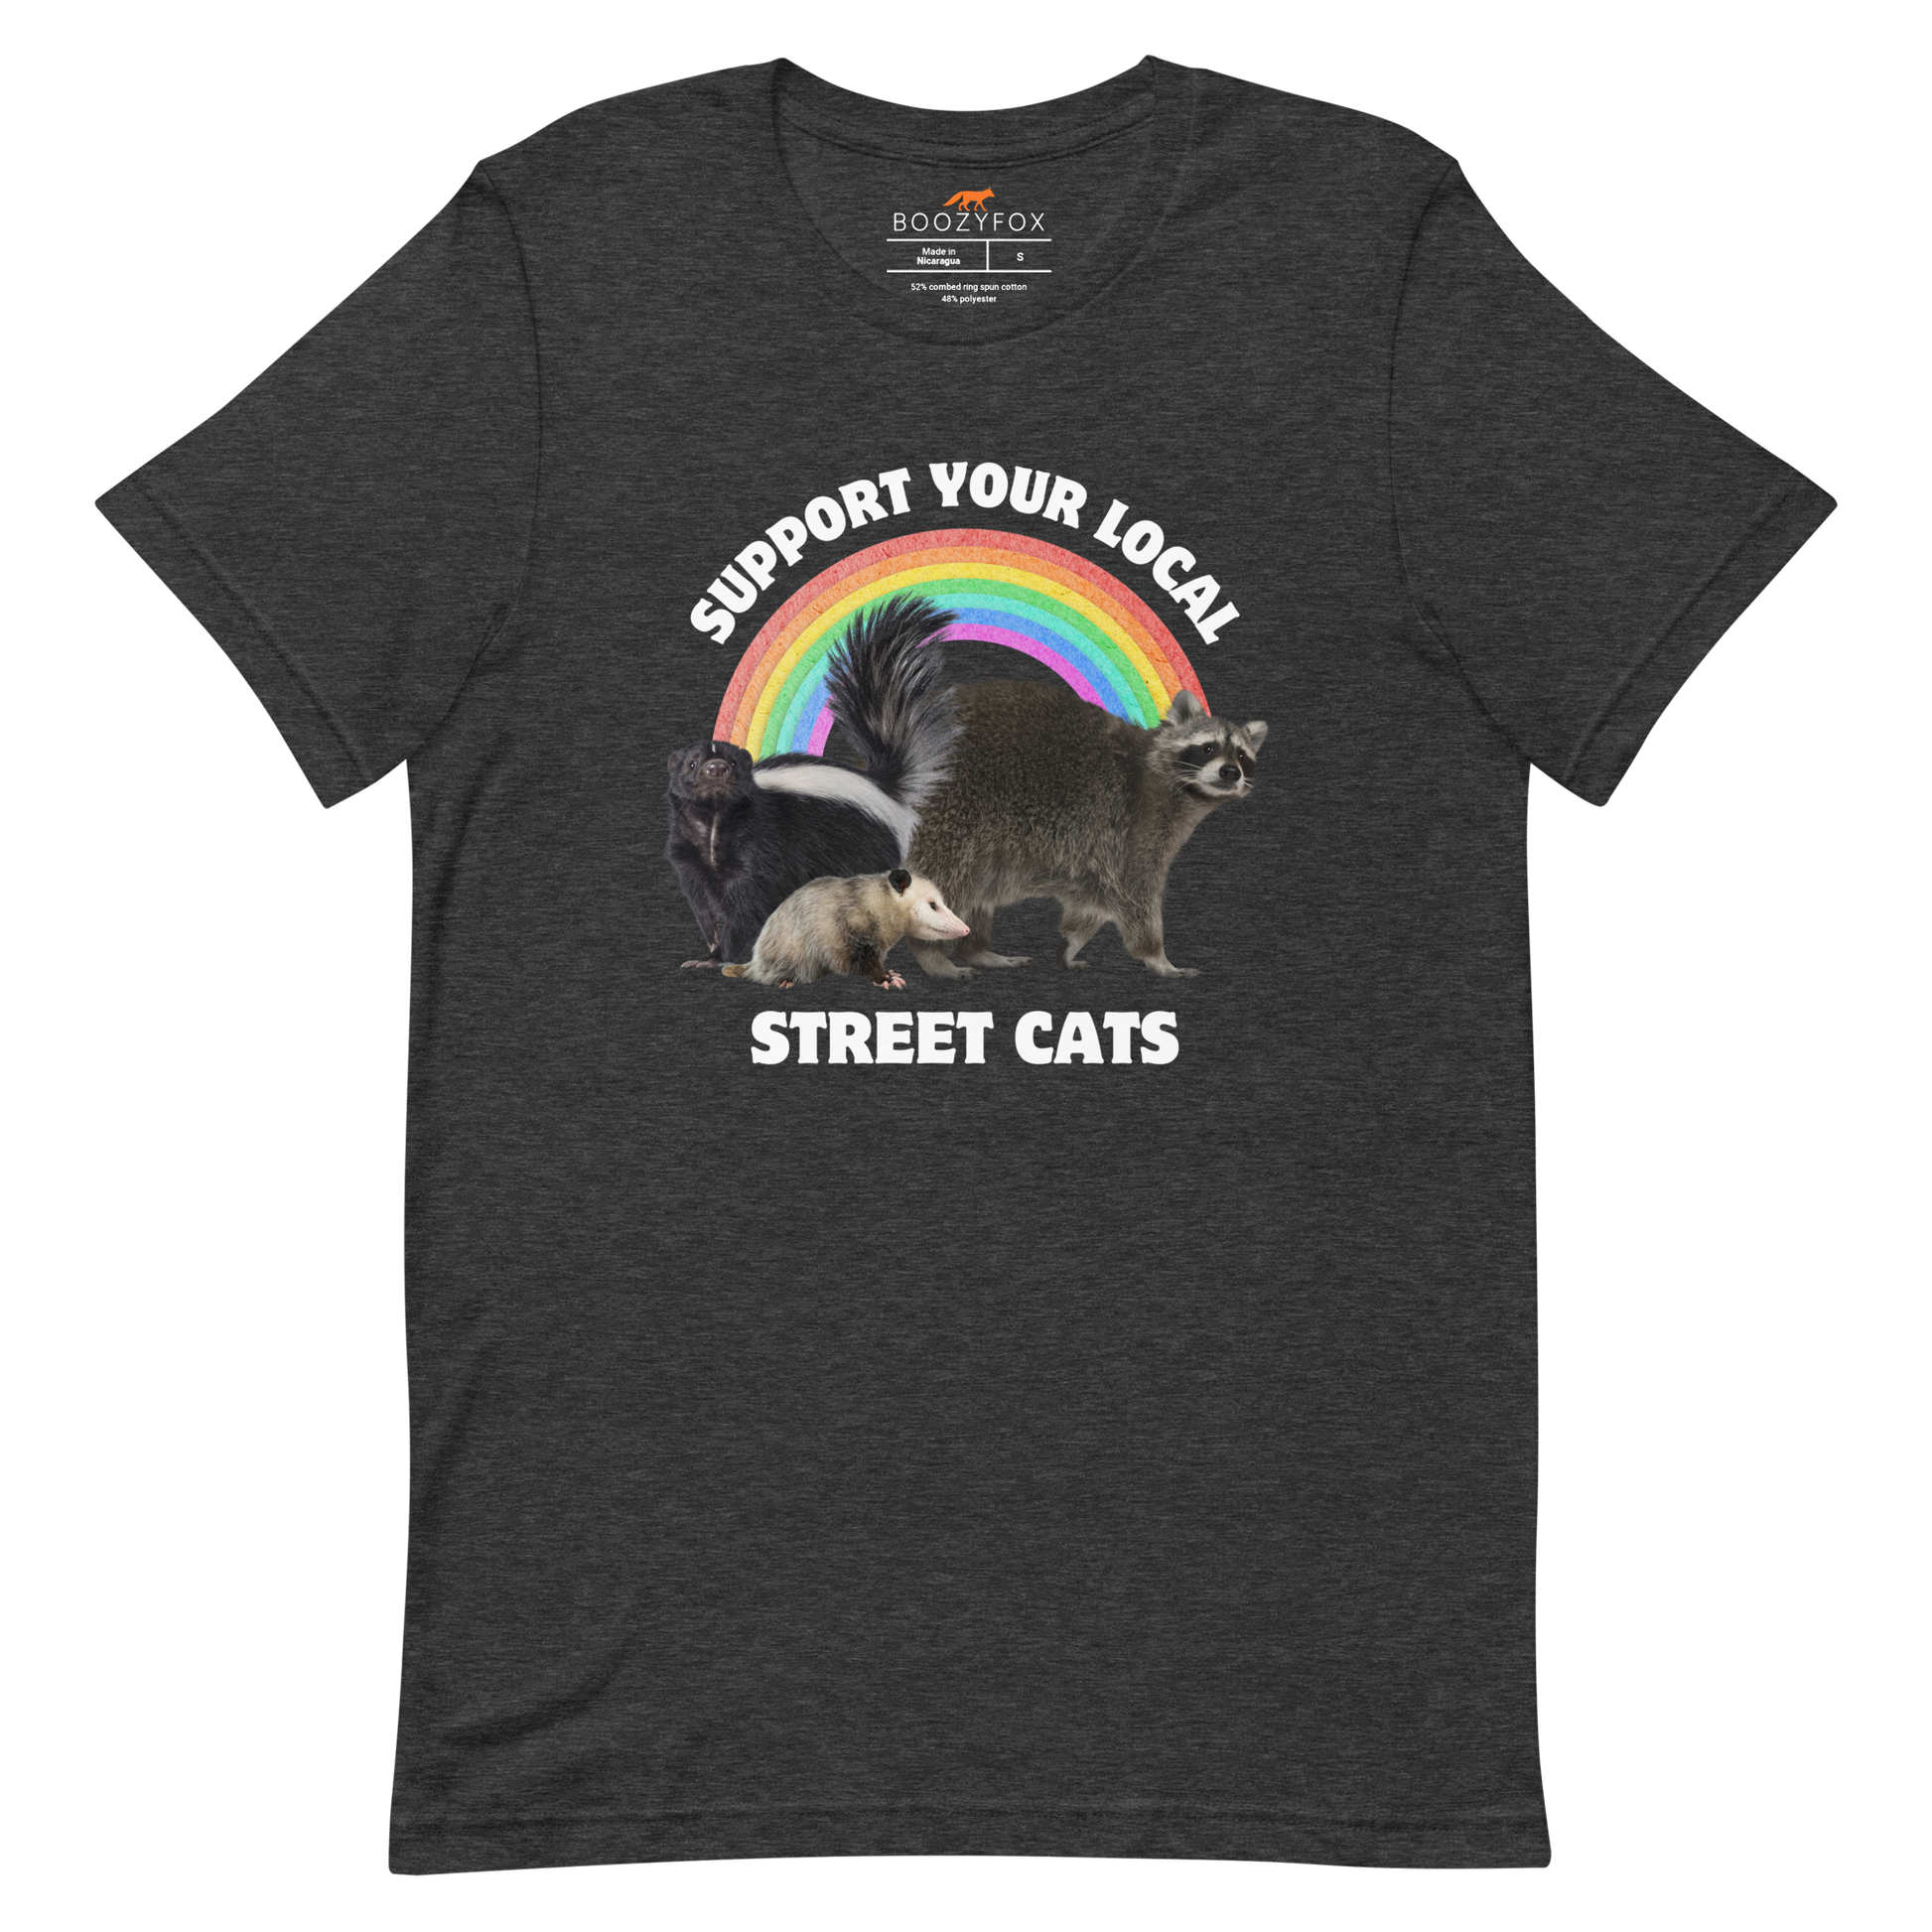 Dark Grey Heather Premium Street Cats Tee featuring a funny 'Support Your Local Street Cats' graphic on the chest - Funny Graphic Animal Tees - Boozy Fox